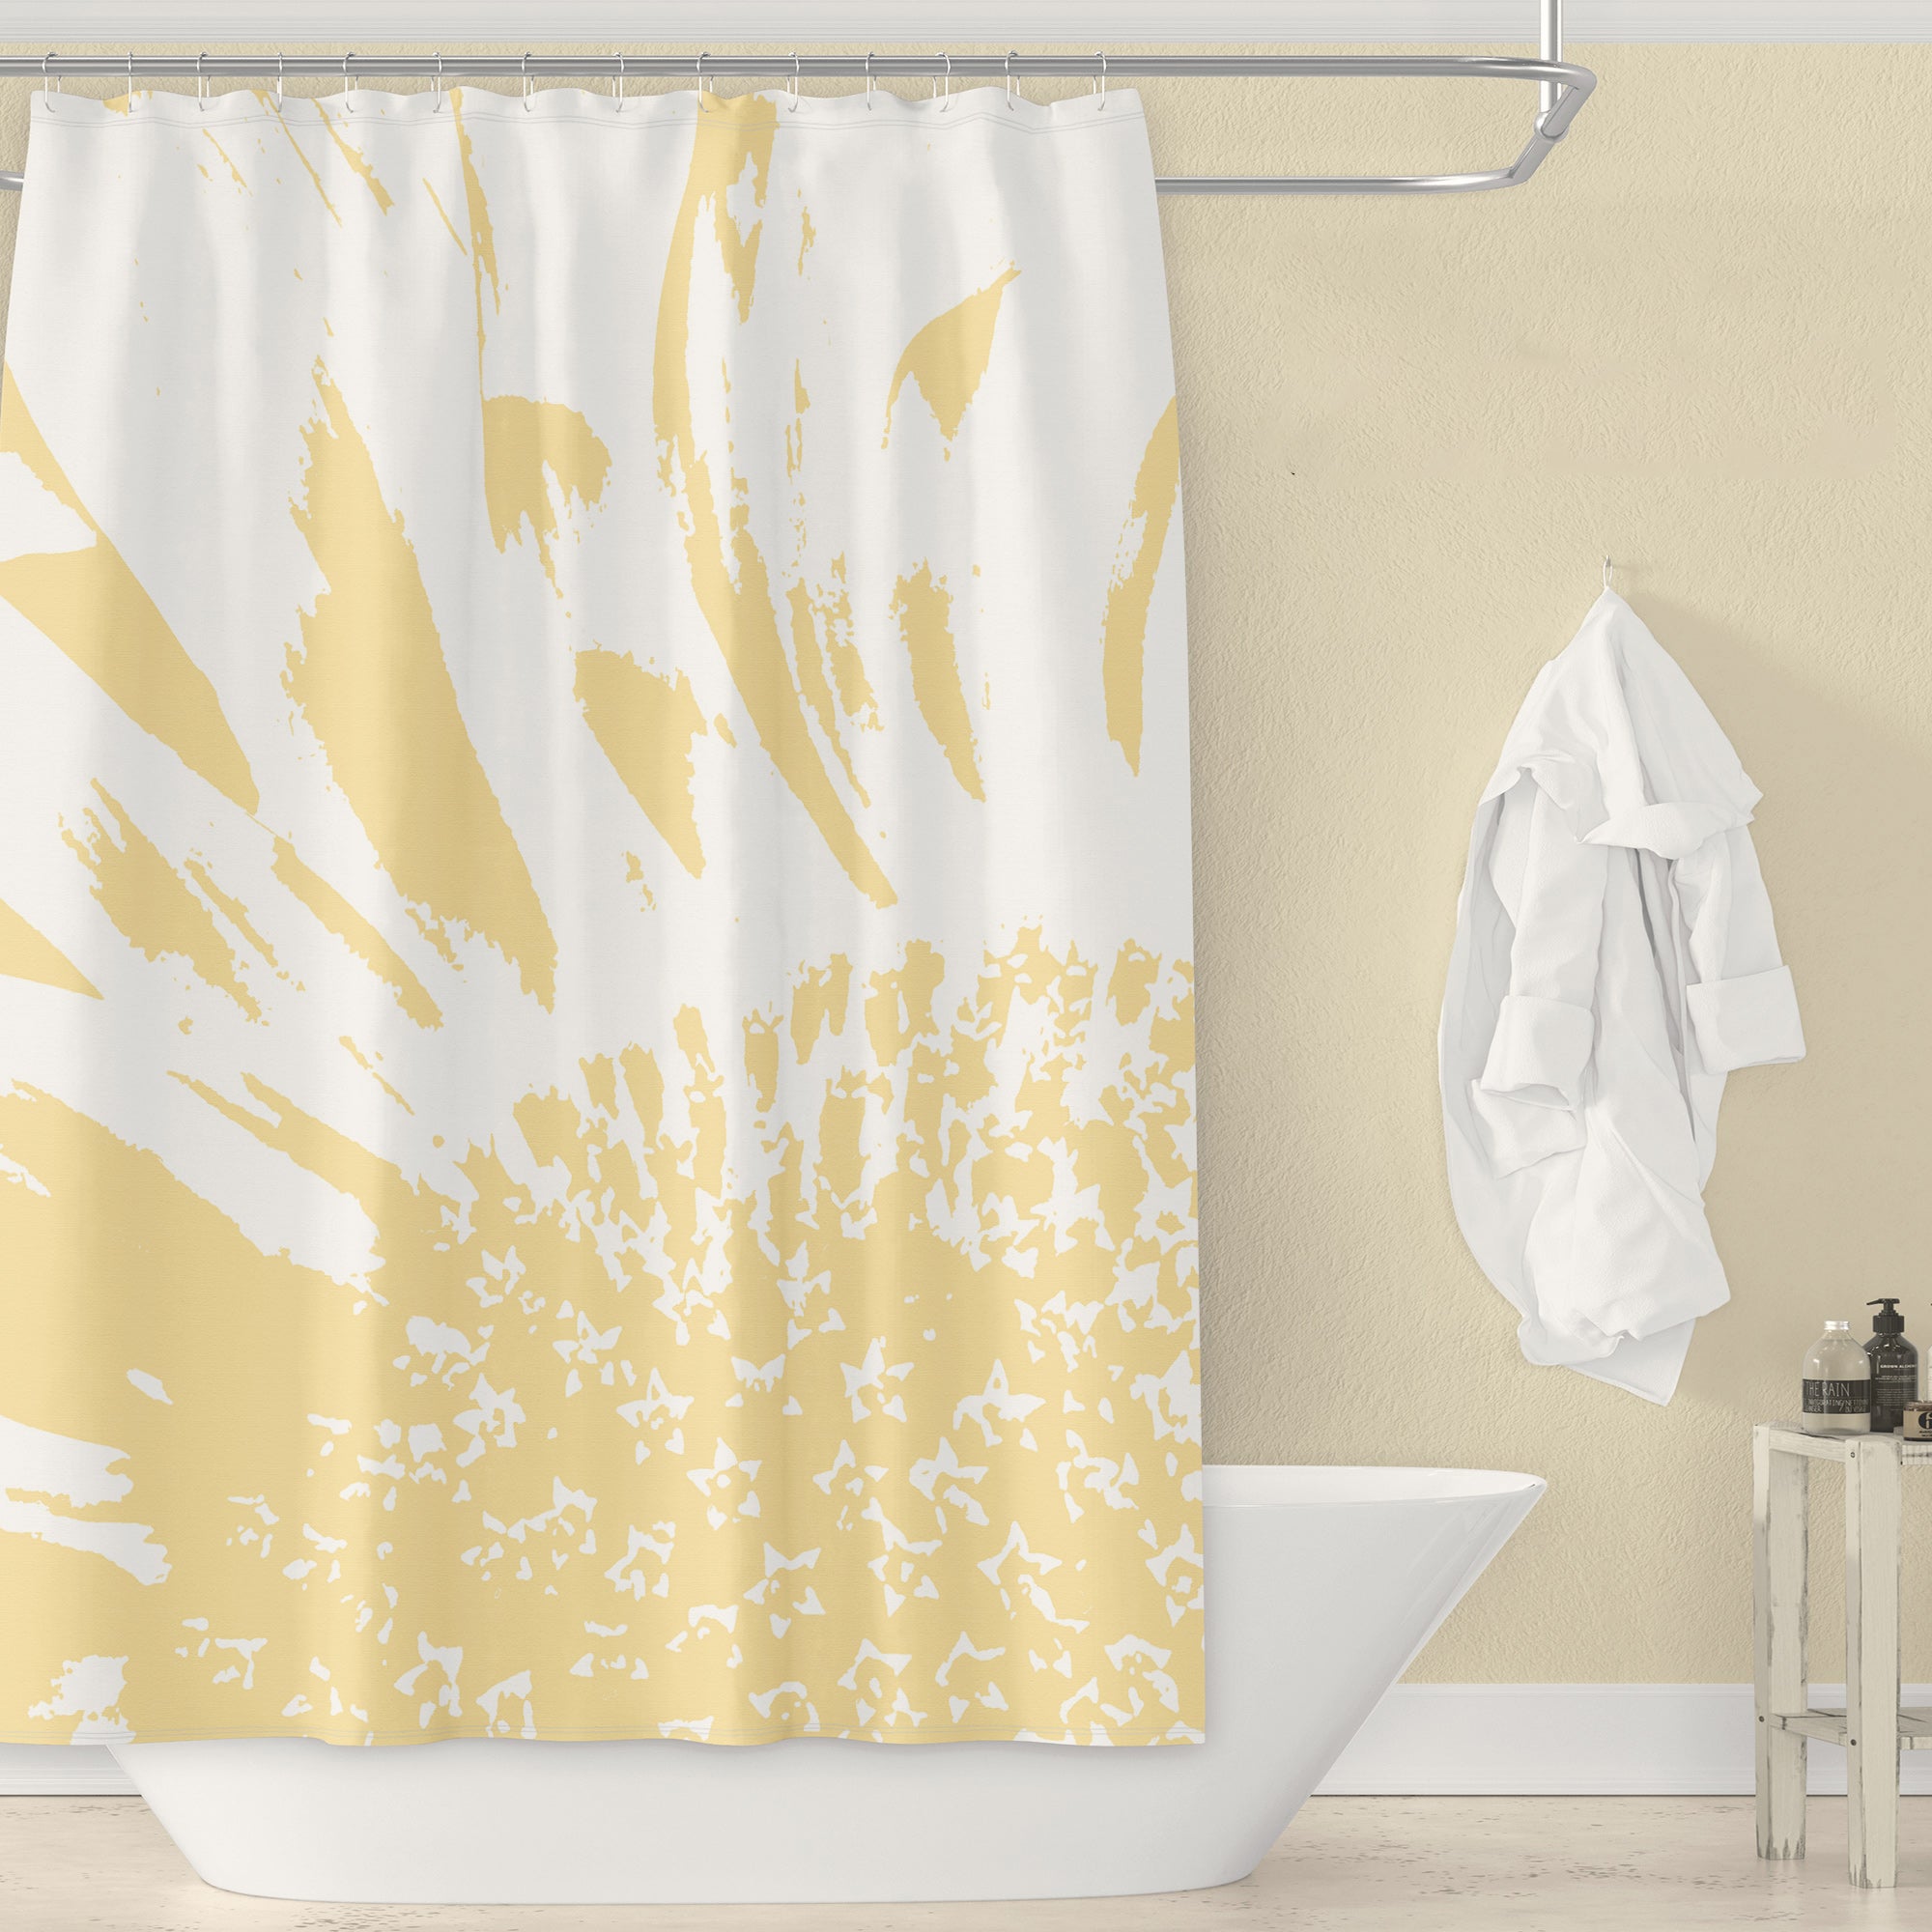 Yellow Flower Shower Curtain Colorful Weeping Bathroom Decor with